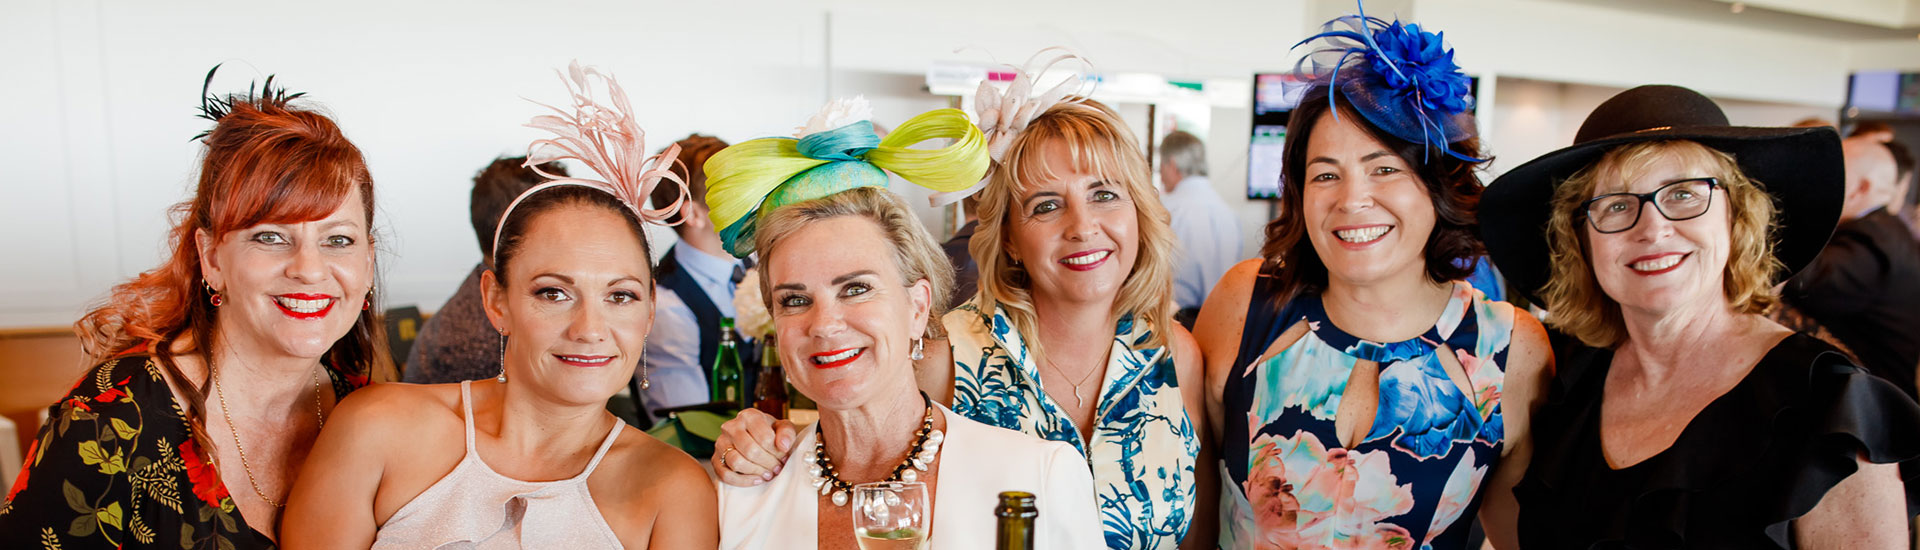 Brisbane Racing Club's executive chef have prepared the ultimate Christmas buffet in the East Terraces for Christmas At The Races. Book now and don't miss out on this unique experience